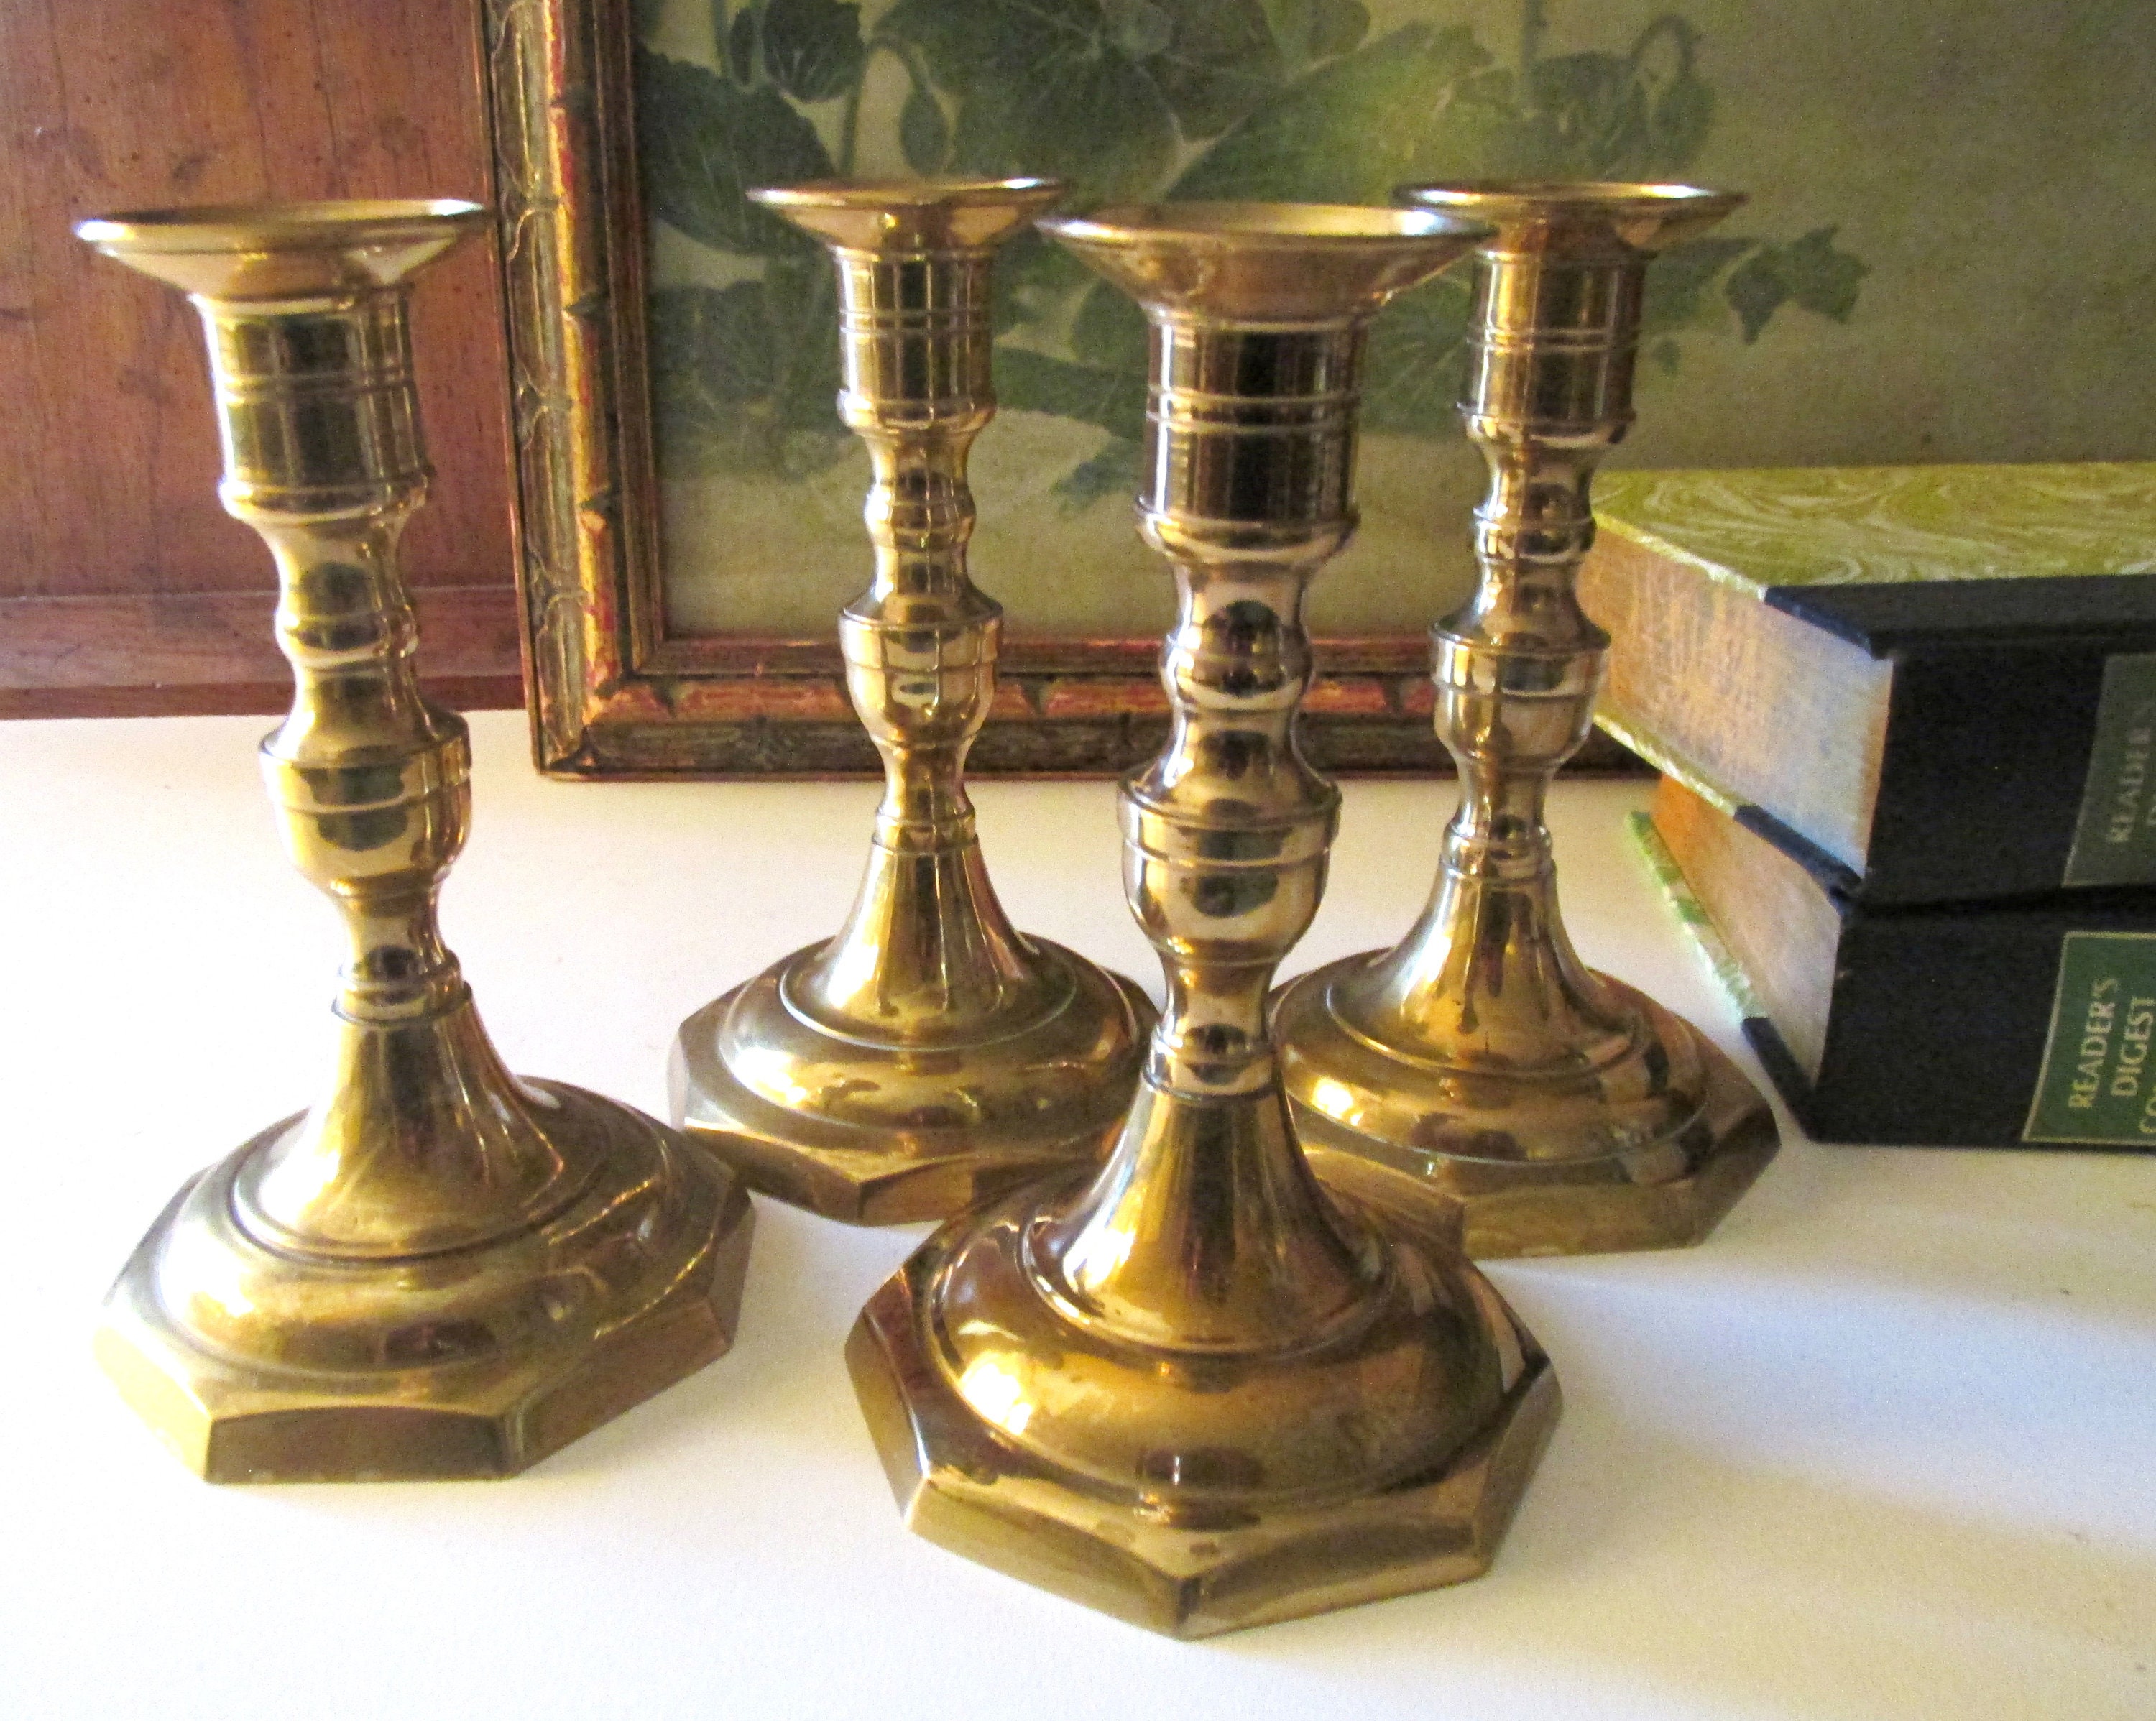 Vintage Set of Four Brass Candlesticks, Candle Holders, Hollywood